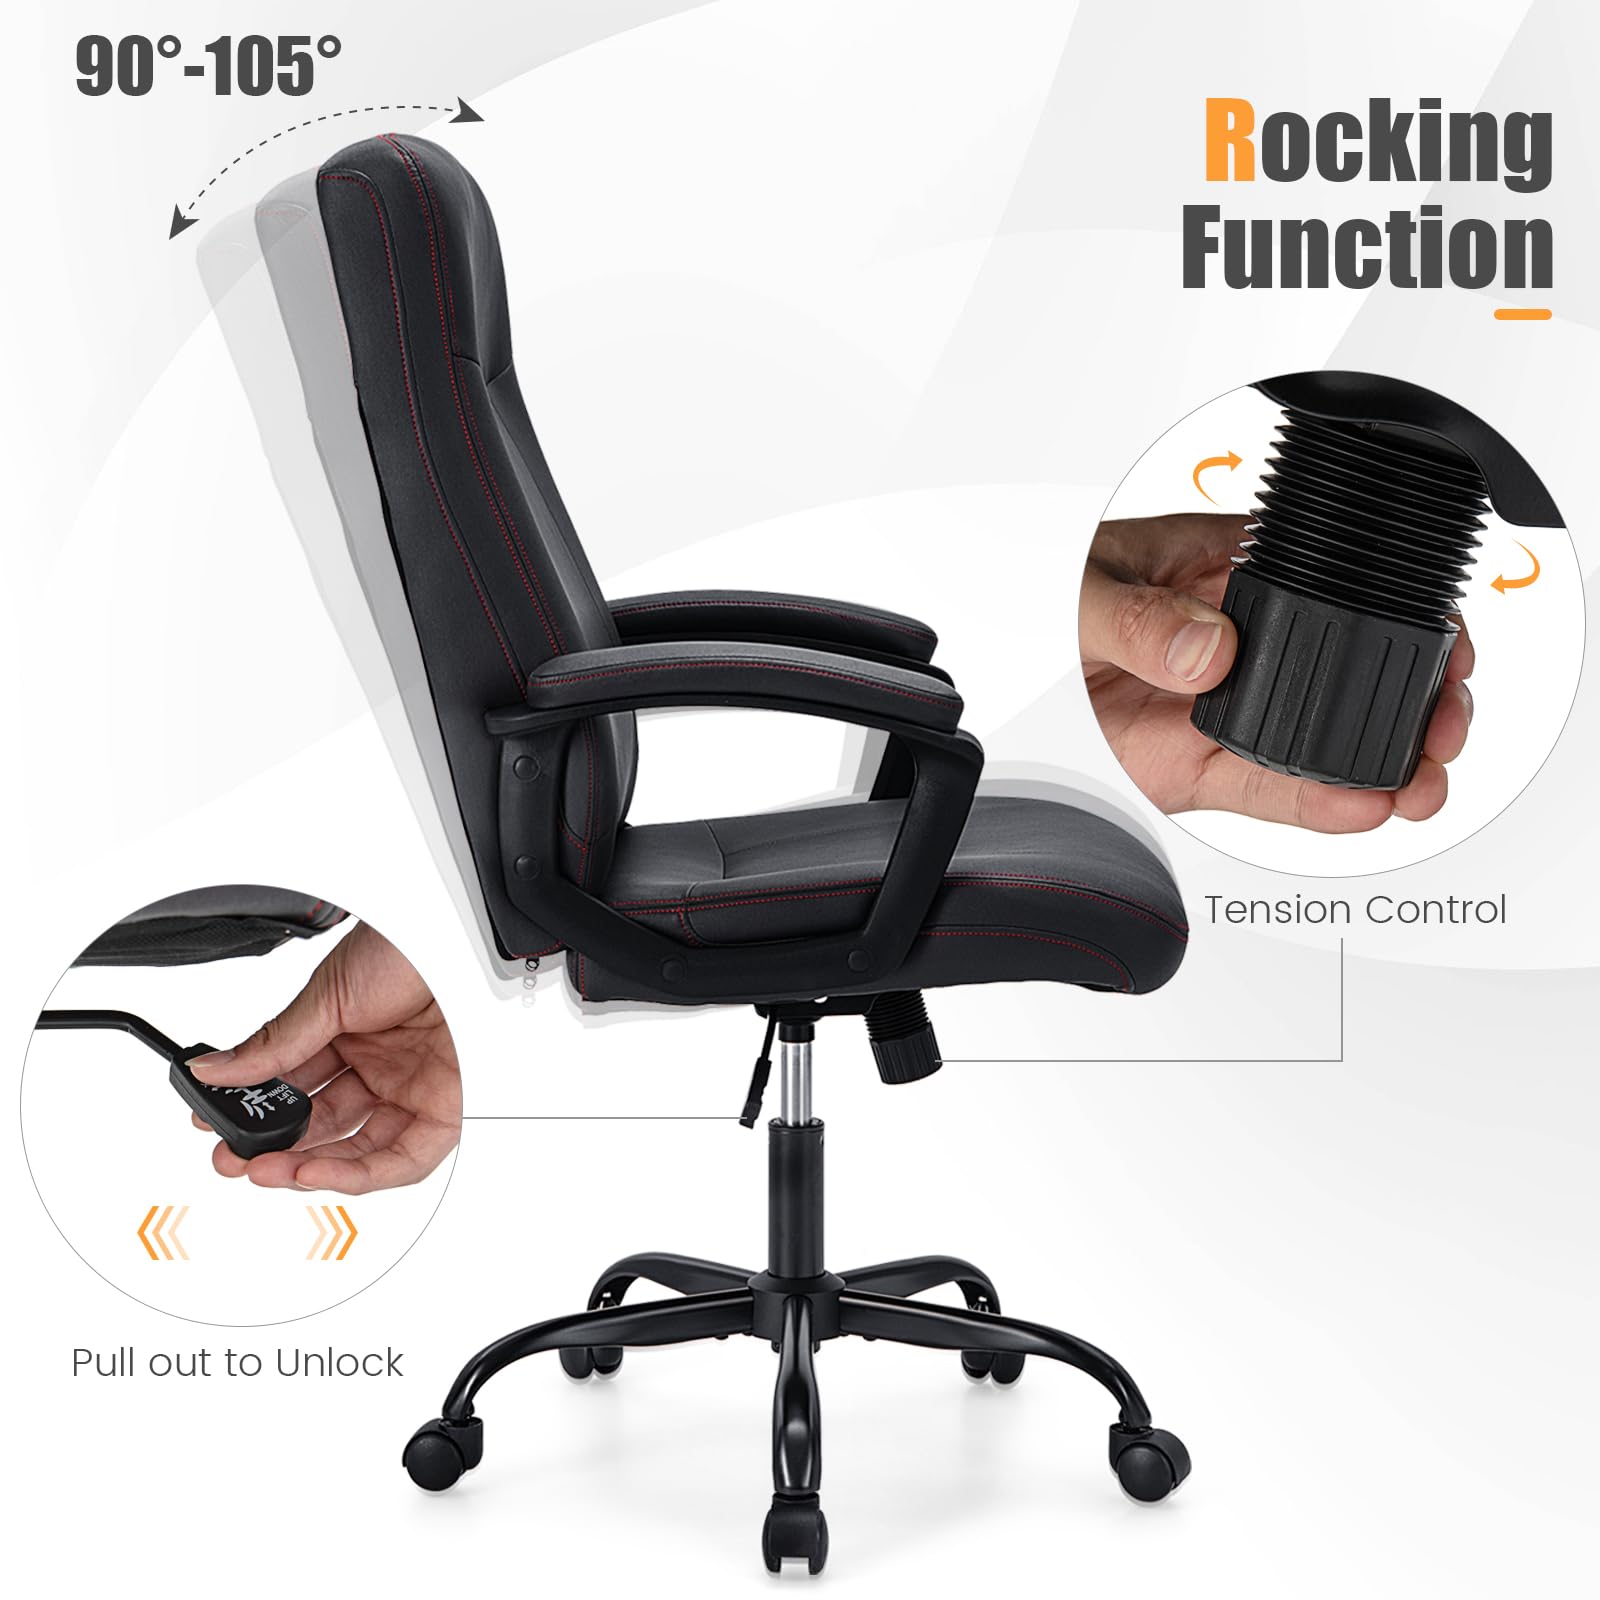 Giantex Executive Office Chair, Ergonomic Home Office Chair, Leather Like Desk Chair with Backrest & Built-in Armrests, Black